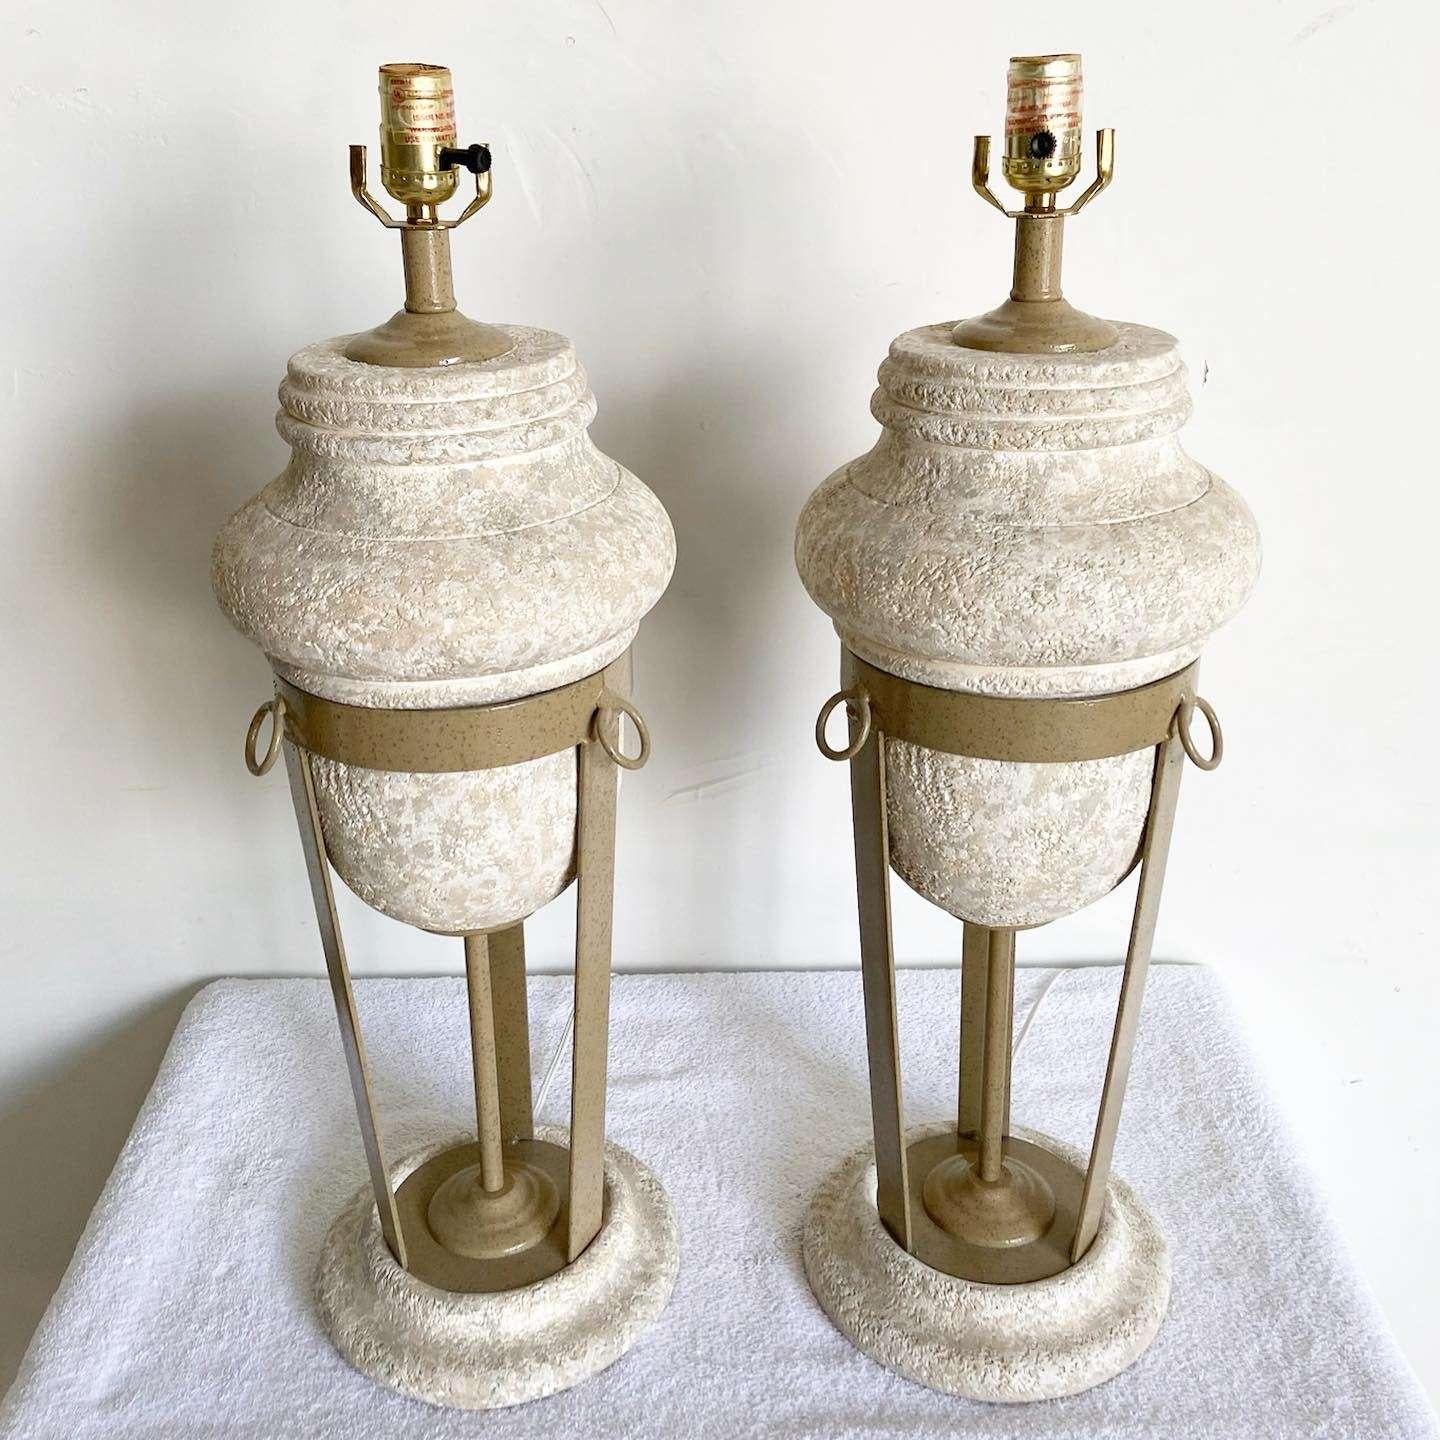 Post-Modern Postmodern Sculptural Plaster and Metal Table Lamps - a Pair For Sale